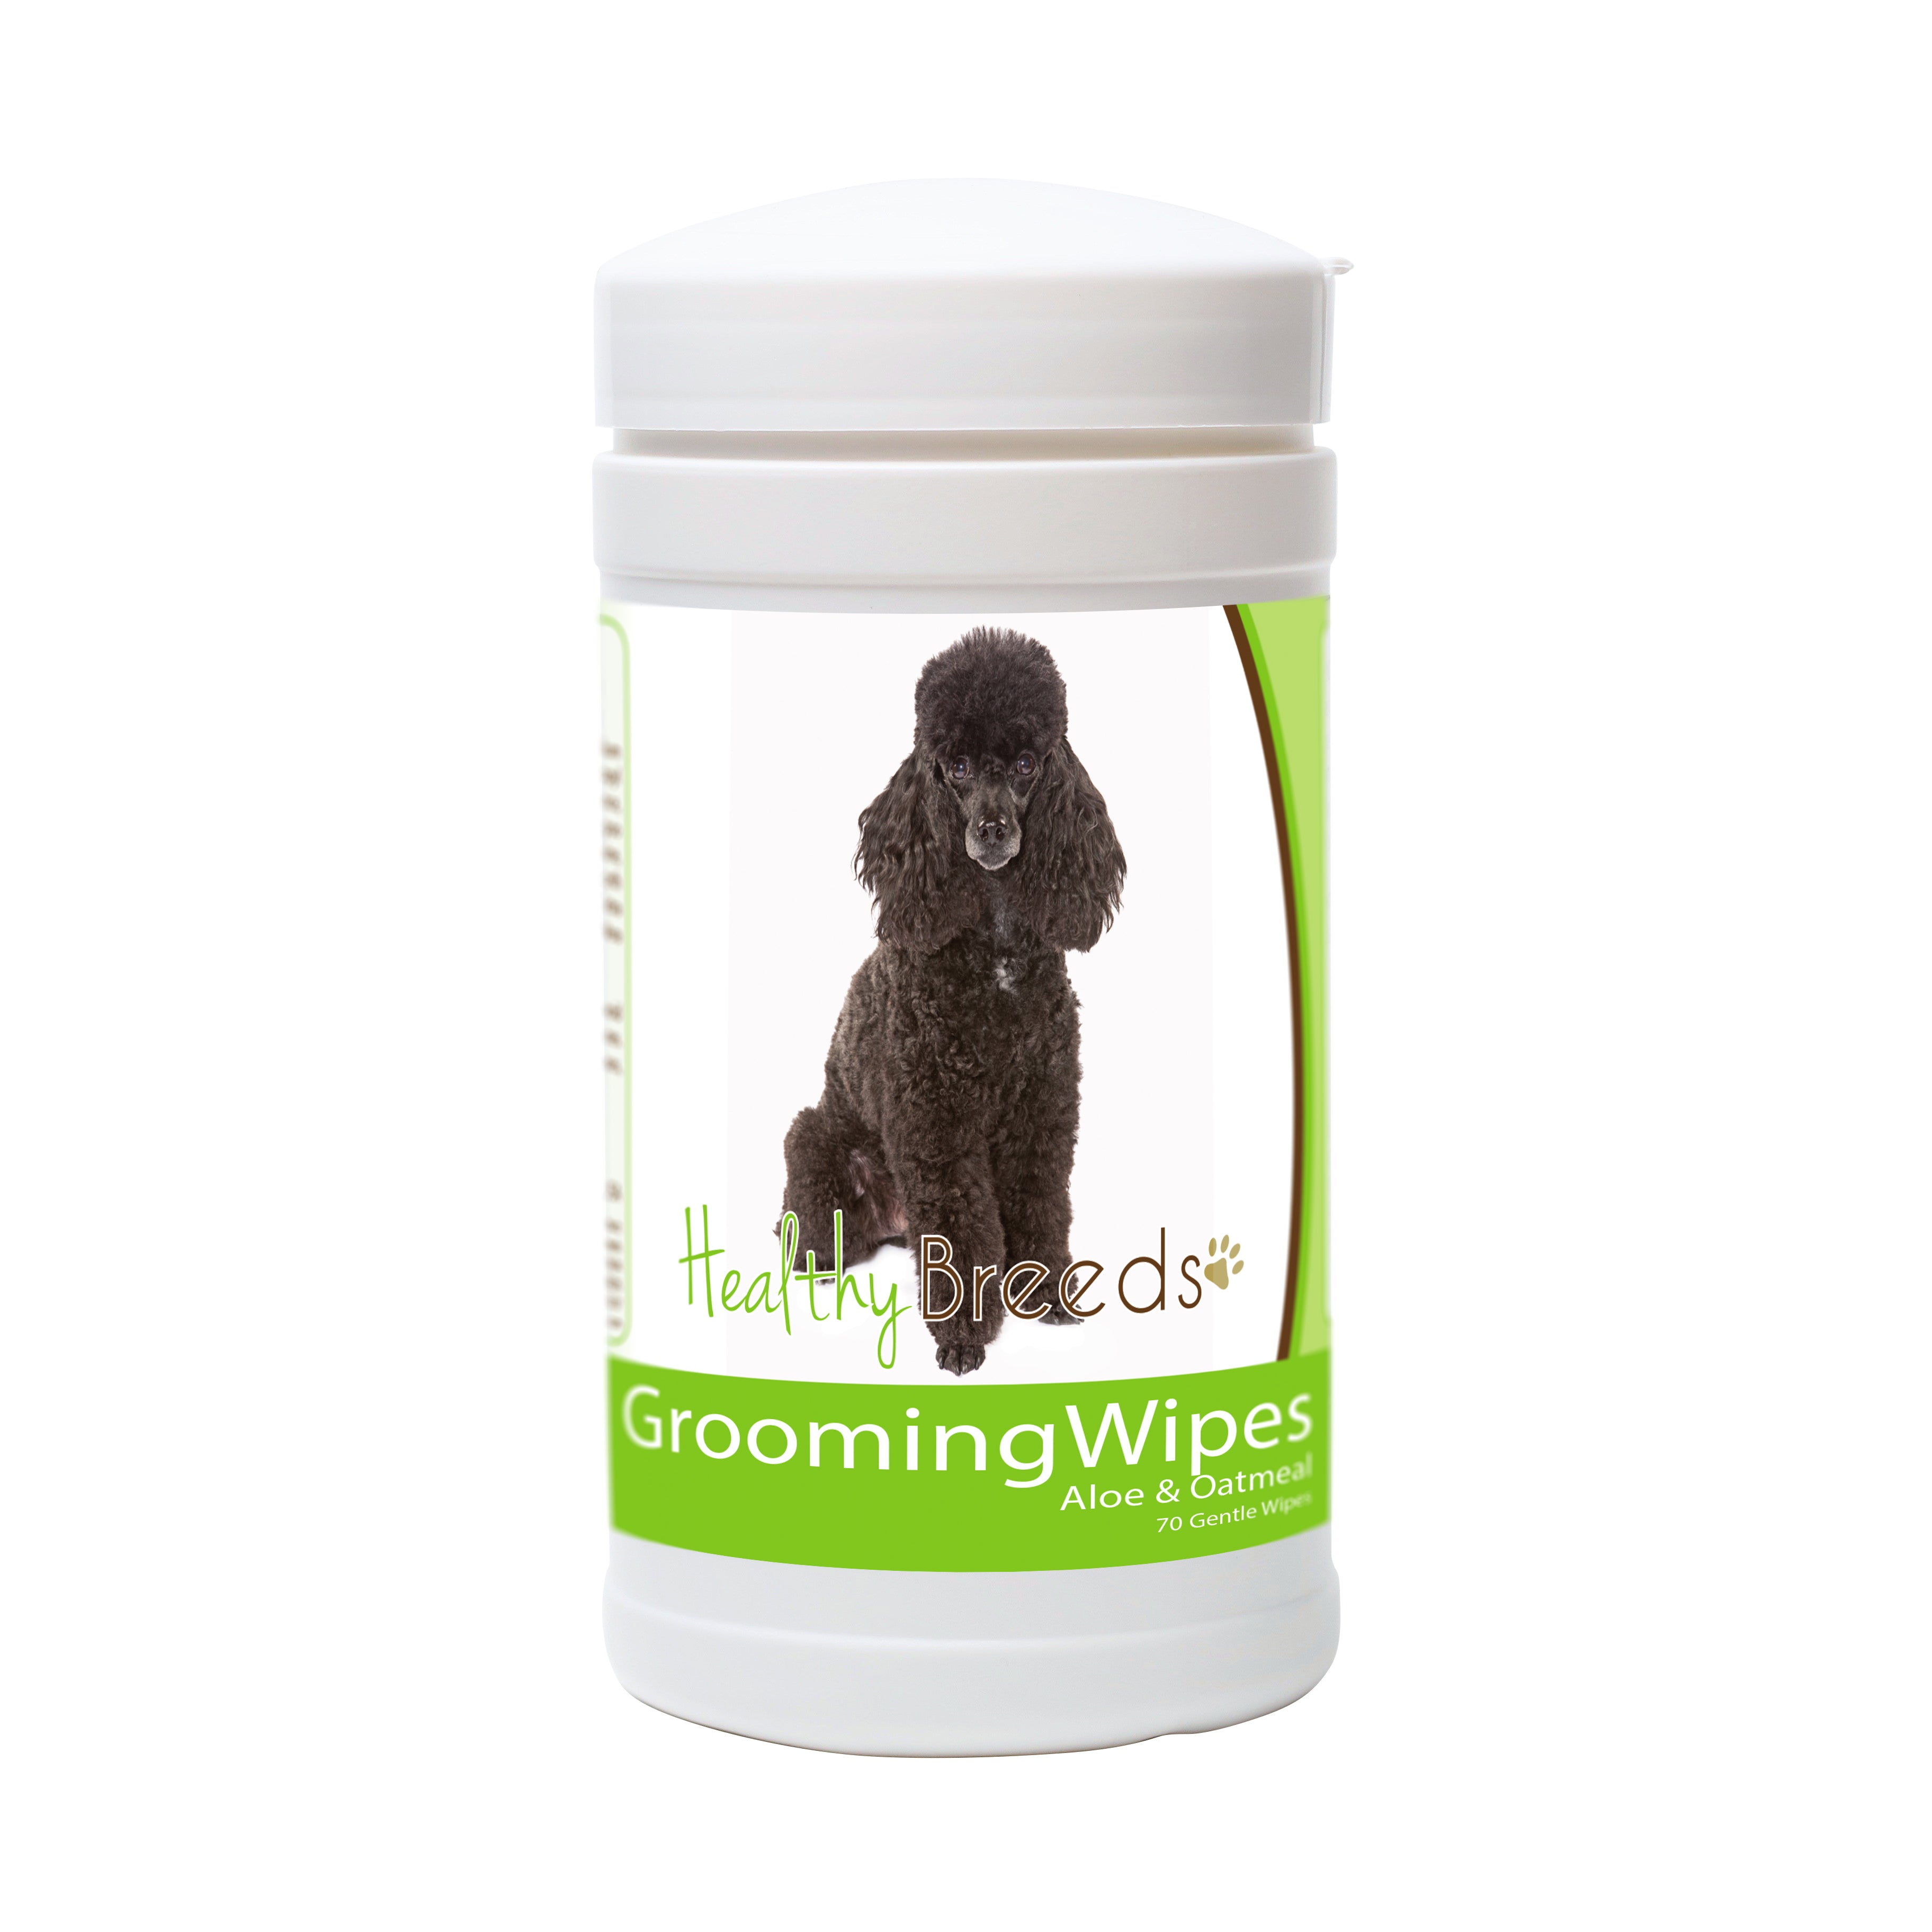 Poodle Grooming Wipes 70 Count